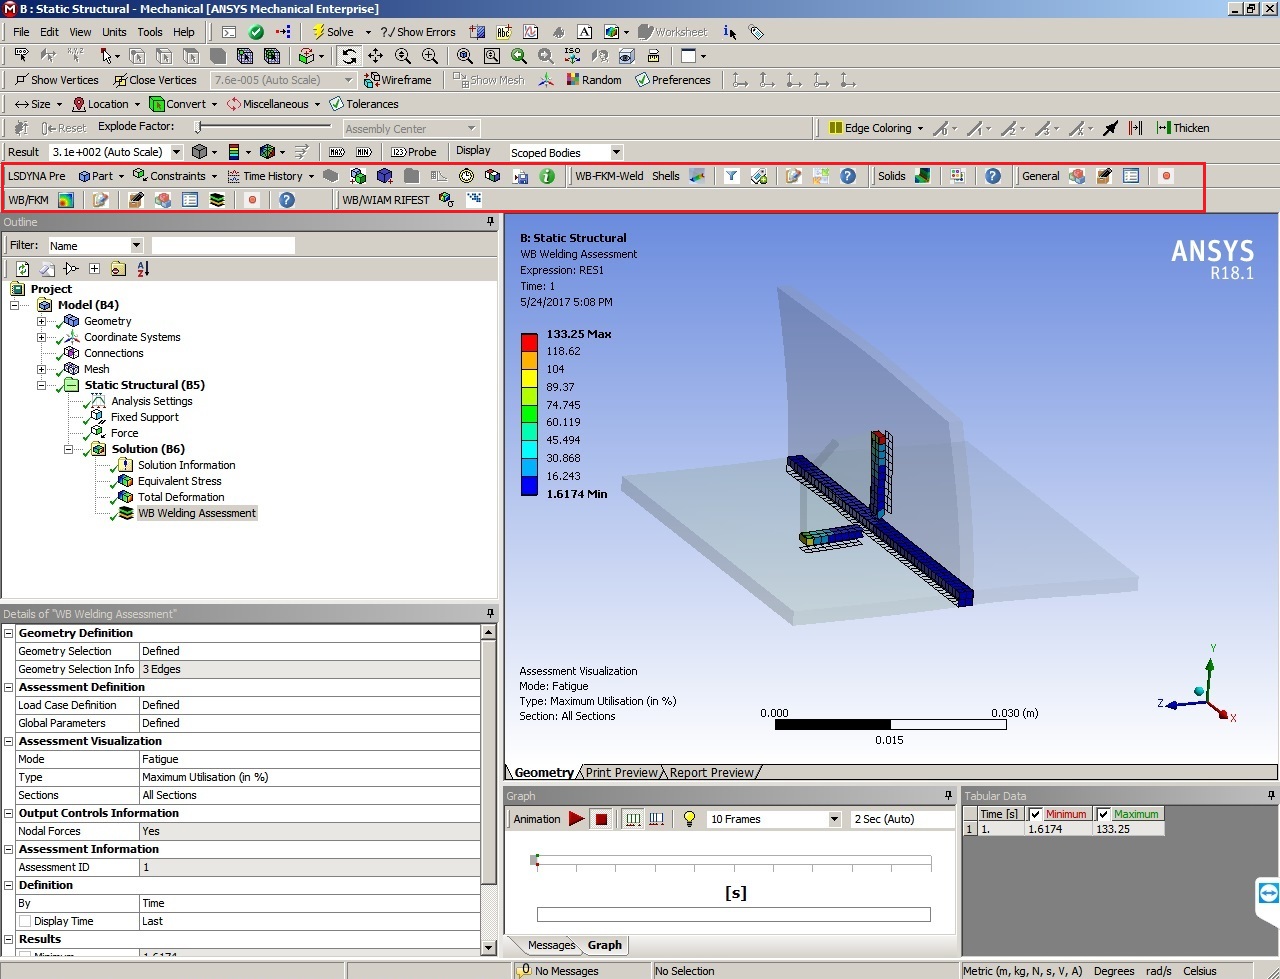 Working with Cadfem FKM inside ANSYS v18 for ANSYS 17.2-18.1 full license